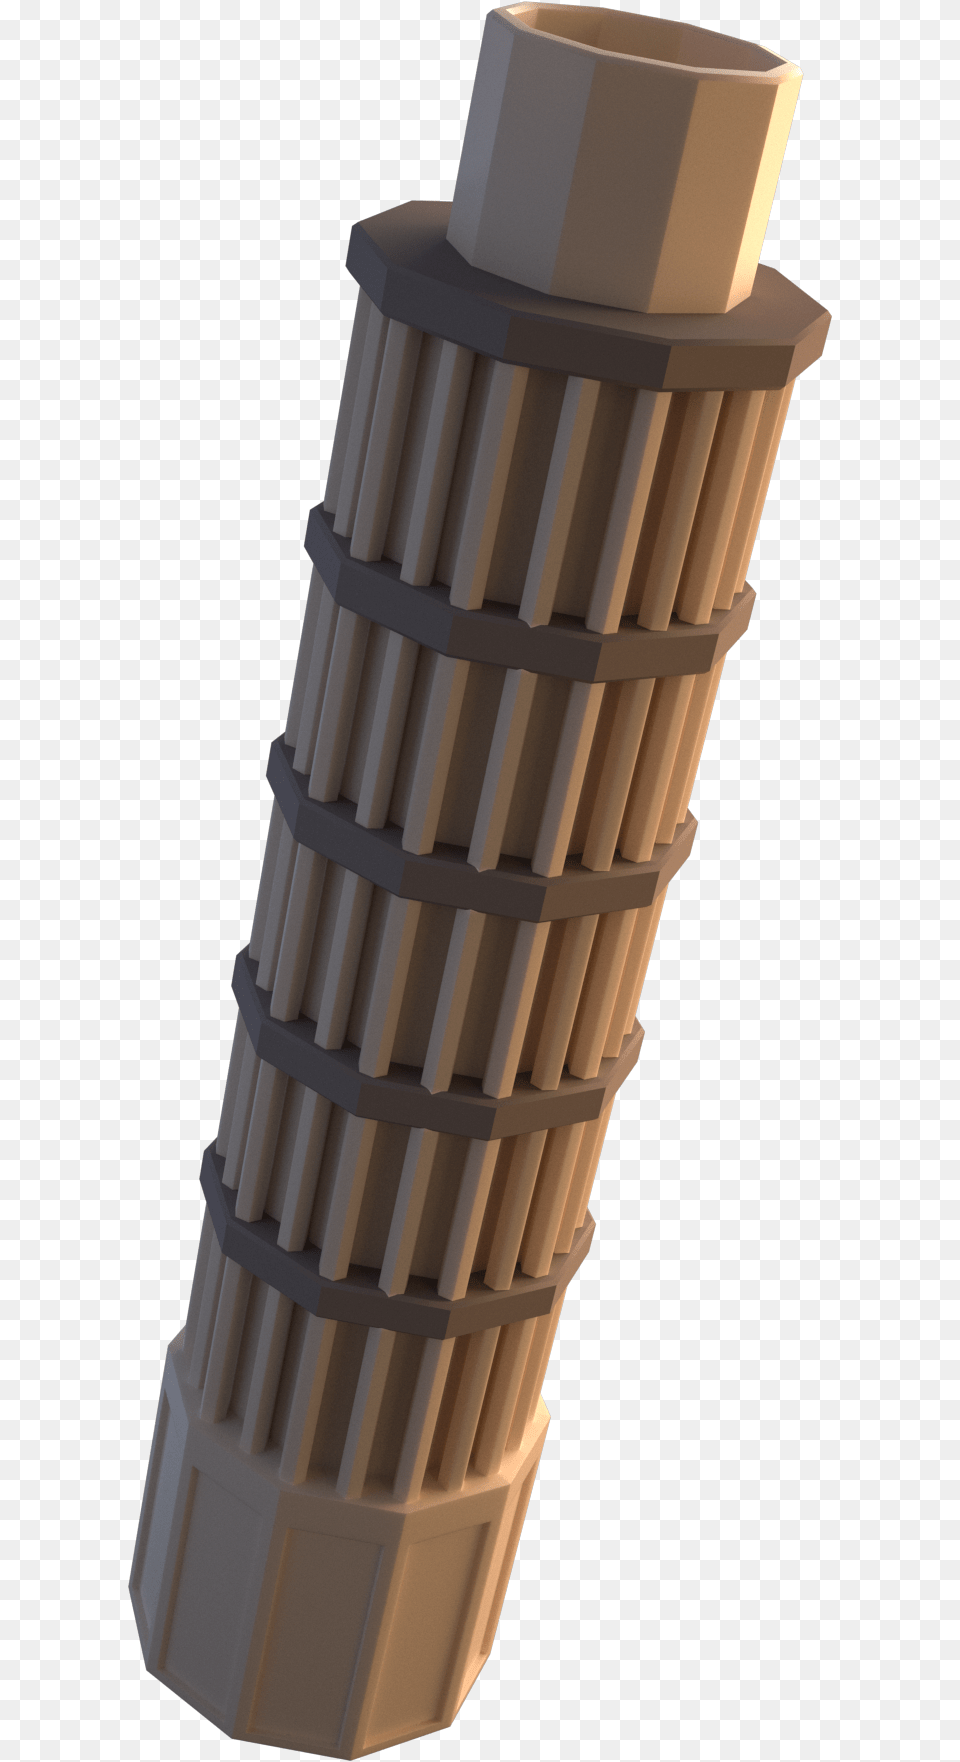 Extra Pisa Tower Atw Thumbnail Torch, Crib, Furniture, Infant Bed Free Transparent Png